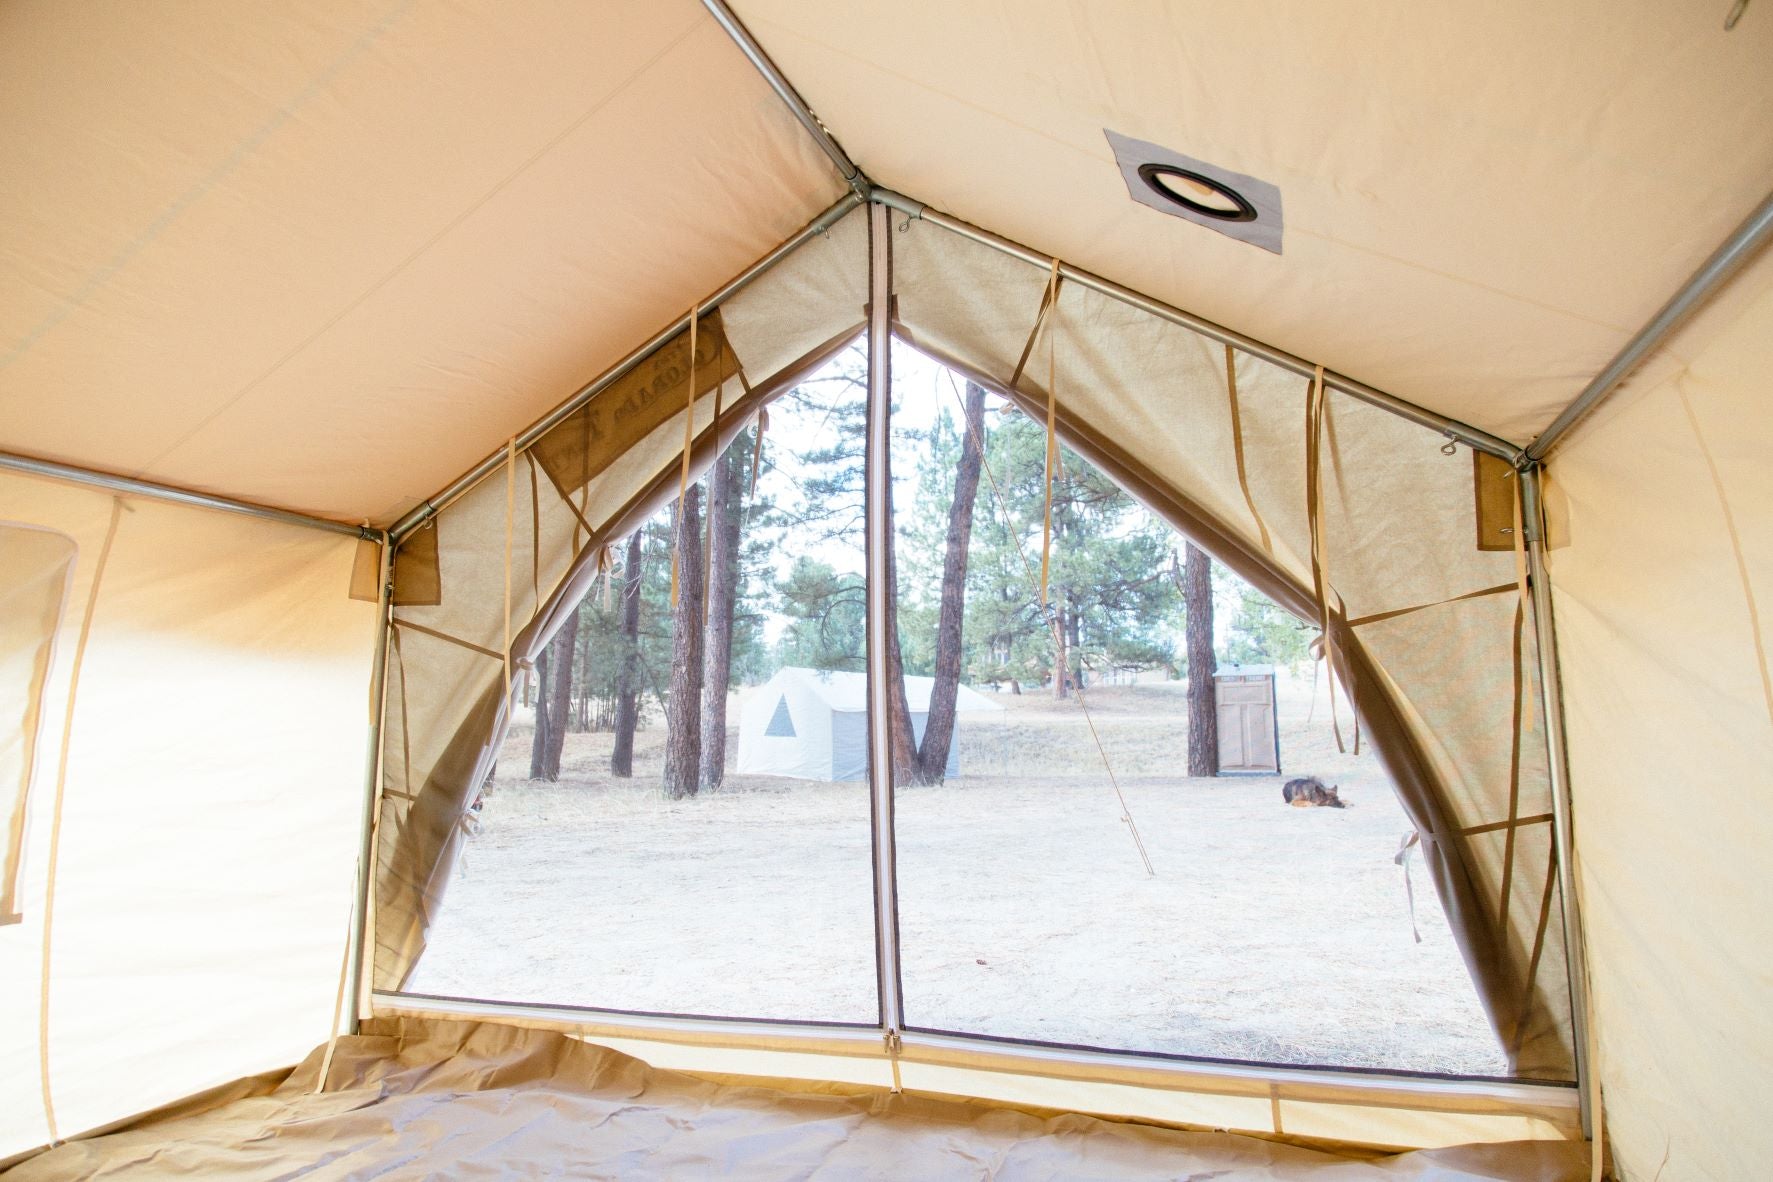 Benefits of Camping in a Canvas Tent